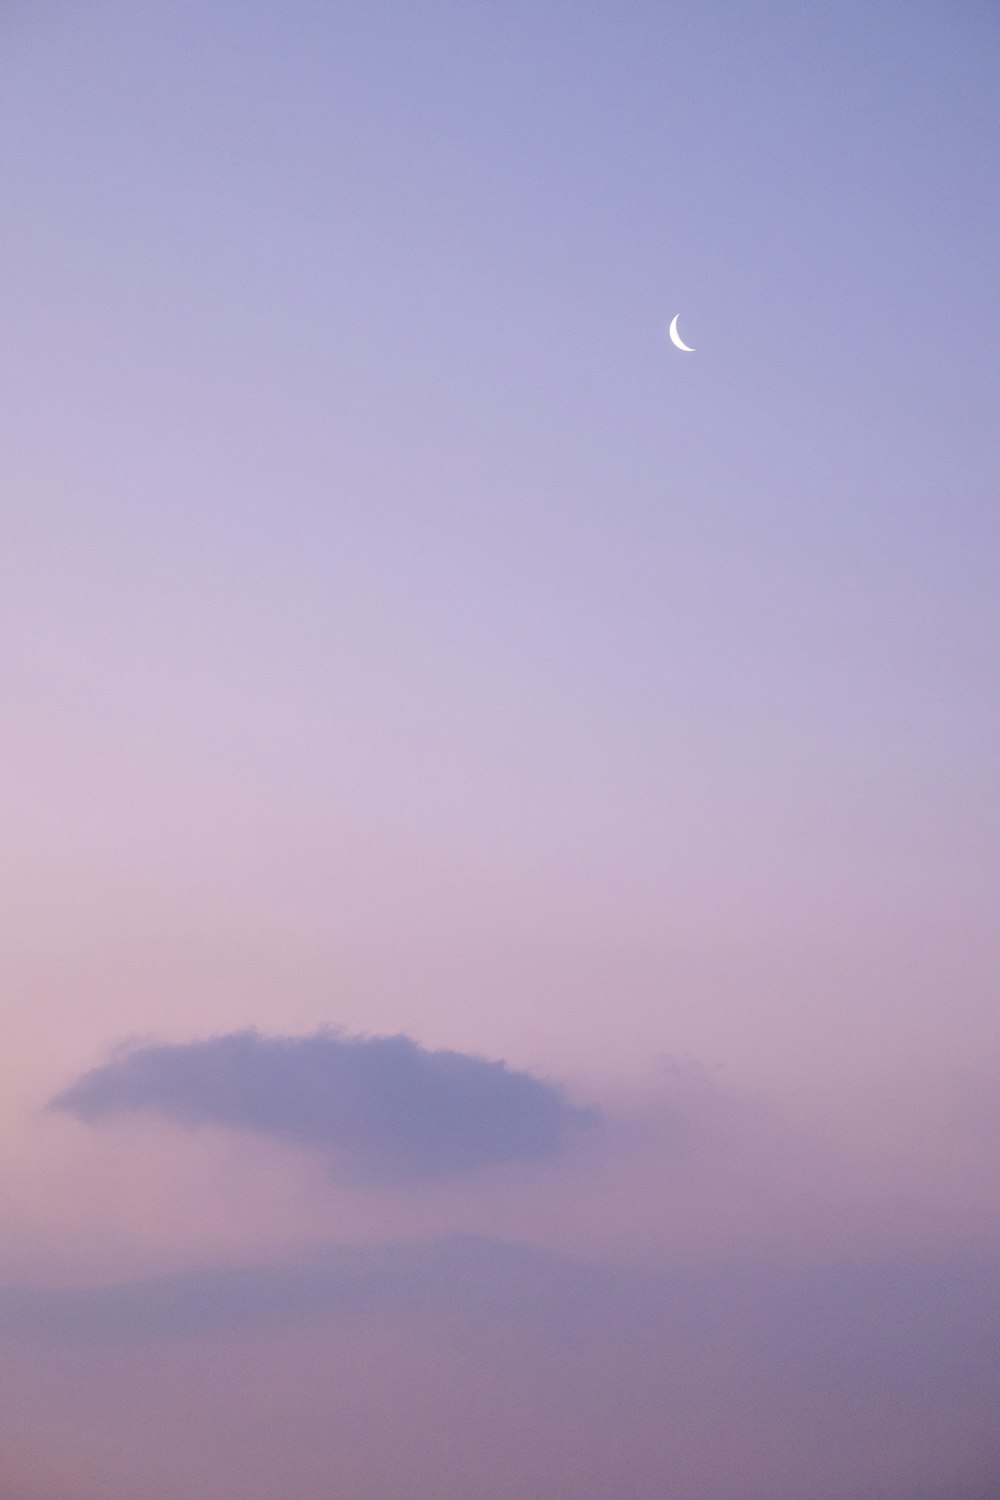 a cloud in the sky with a half moon in the distance